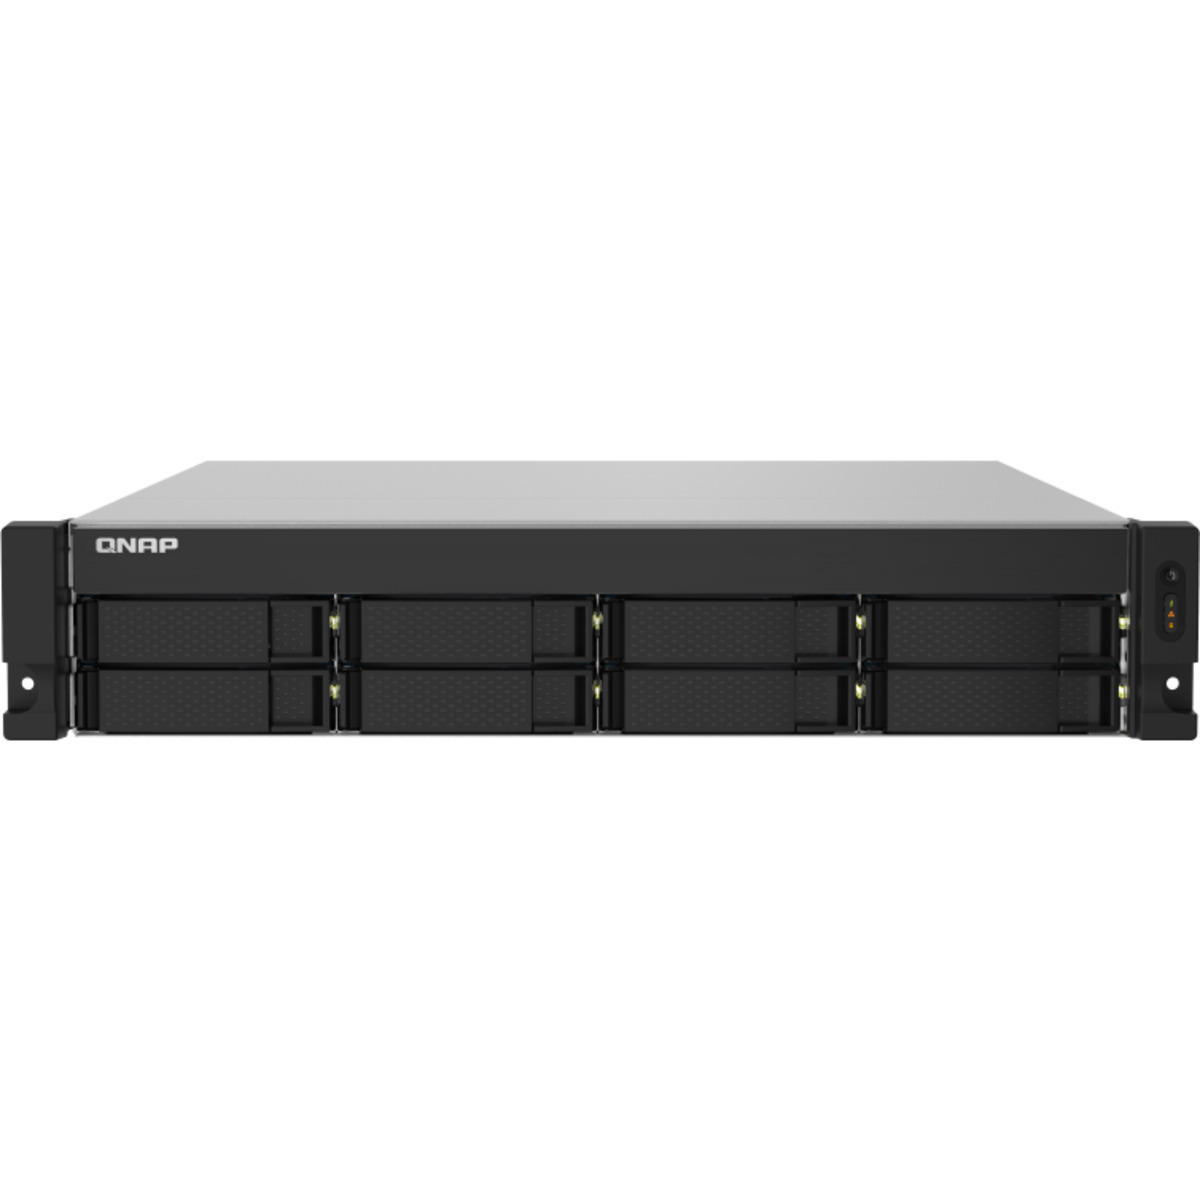 QNAP TS-832PXU-RP 10tb 8-Bay RackMount Personal / Basic Home / Small Office NAS - Network Attached Storage Device 5x2tb Sandisk Ultra 3D SDSSDH3-2T00 2.5 560/520MB/s SATA 6Gb/s SSD CONSUMER Class Drives Installed - Burn-In Tested - FREE RAM UPGRADE TS-832PXU-RP